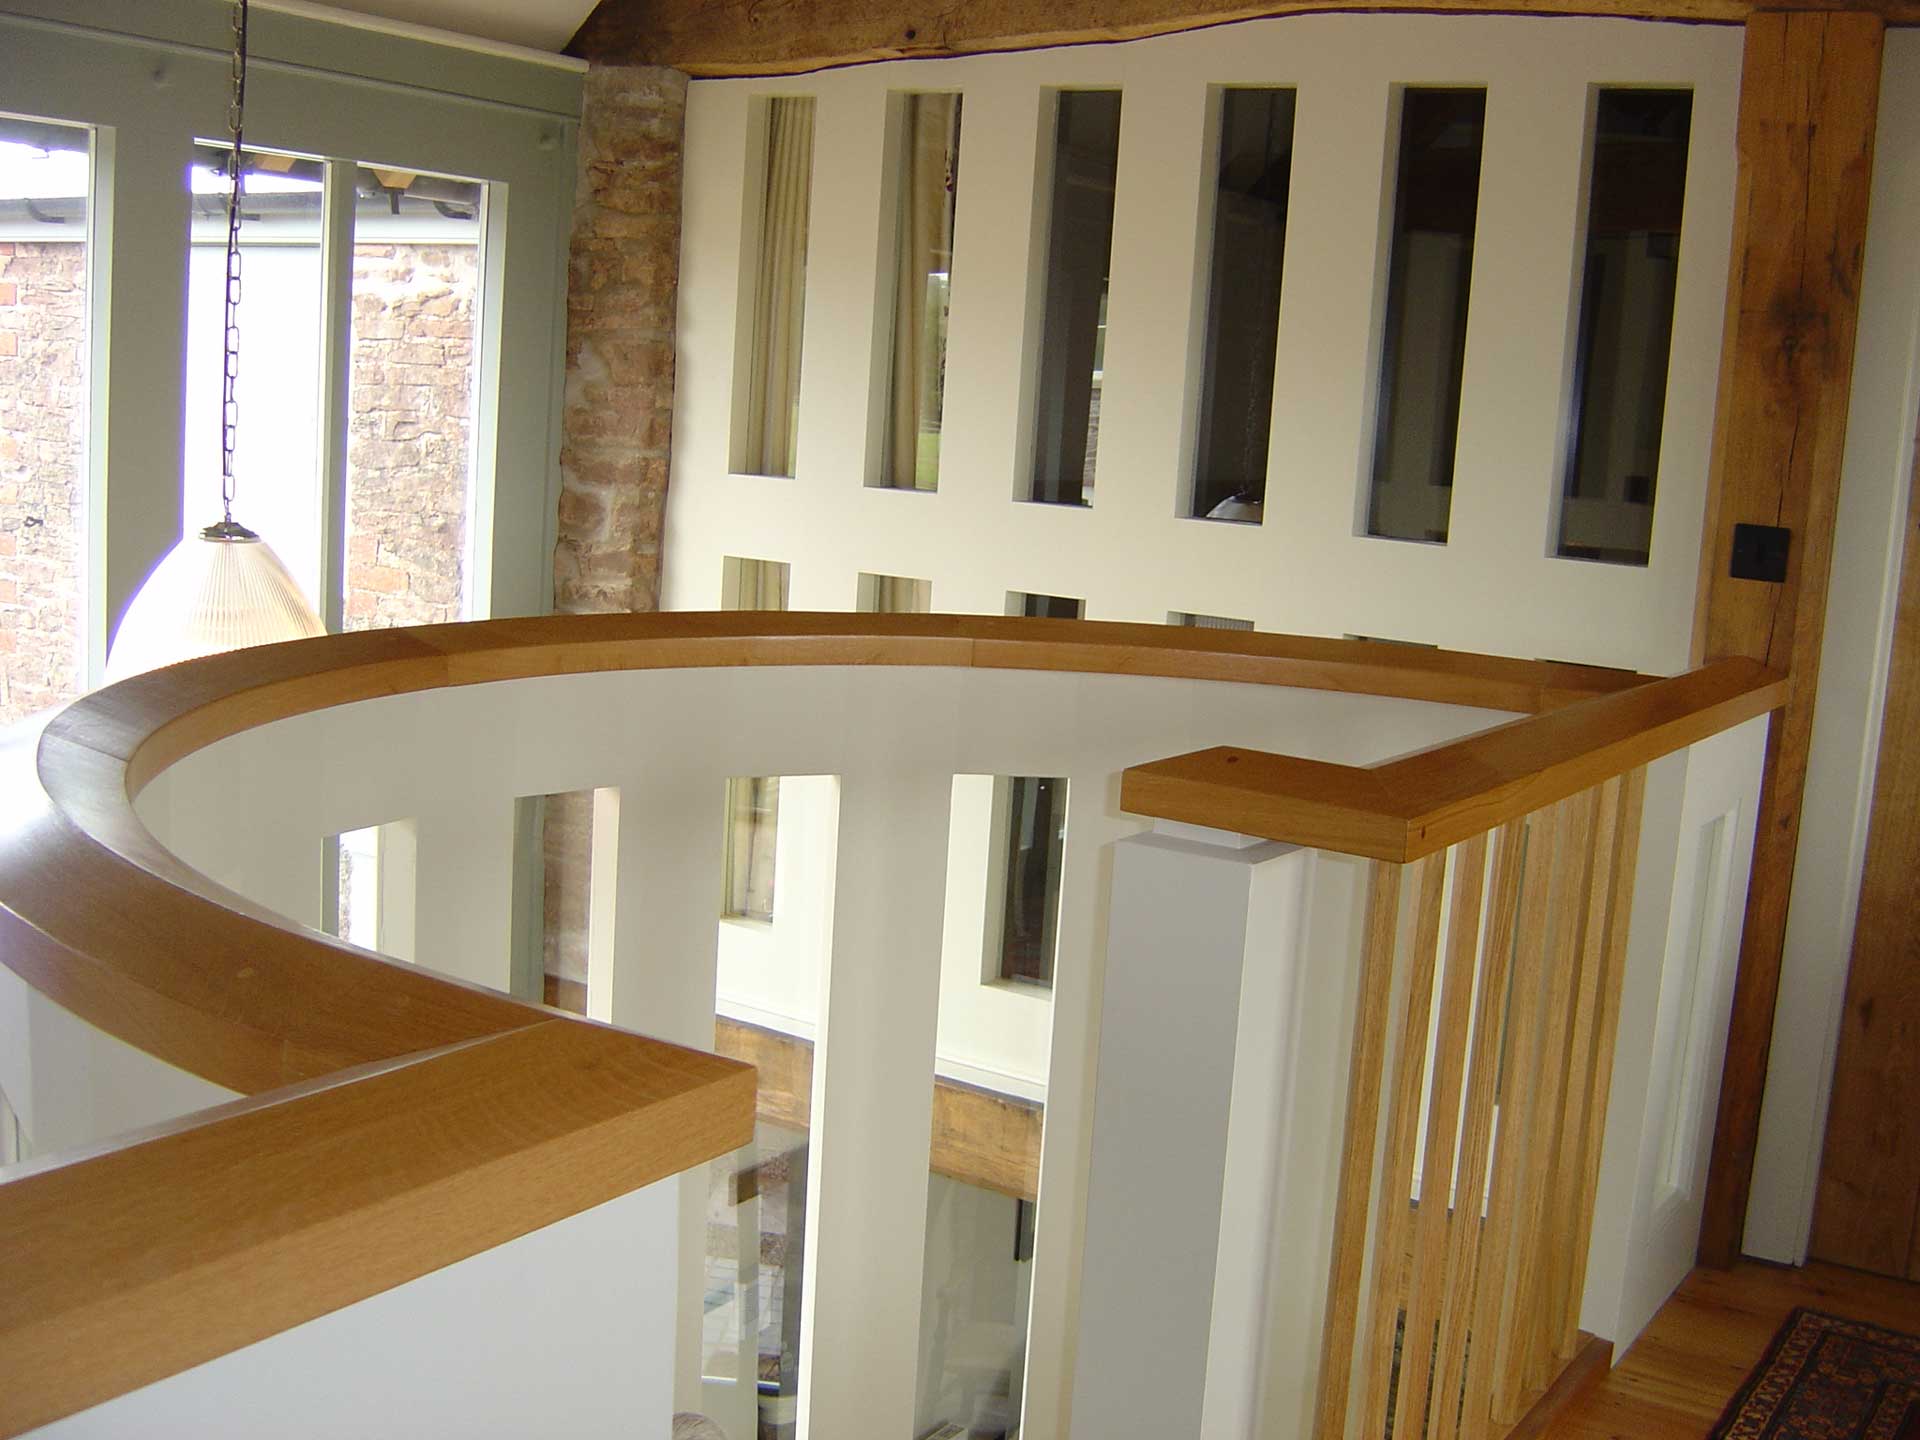 Timber joinery